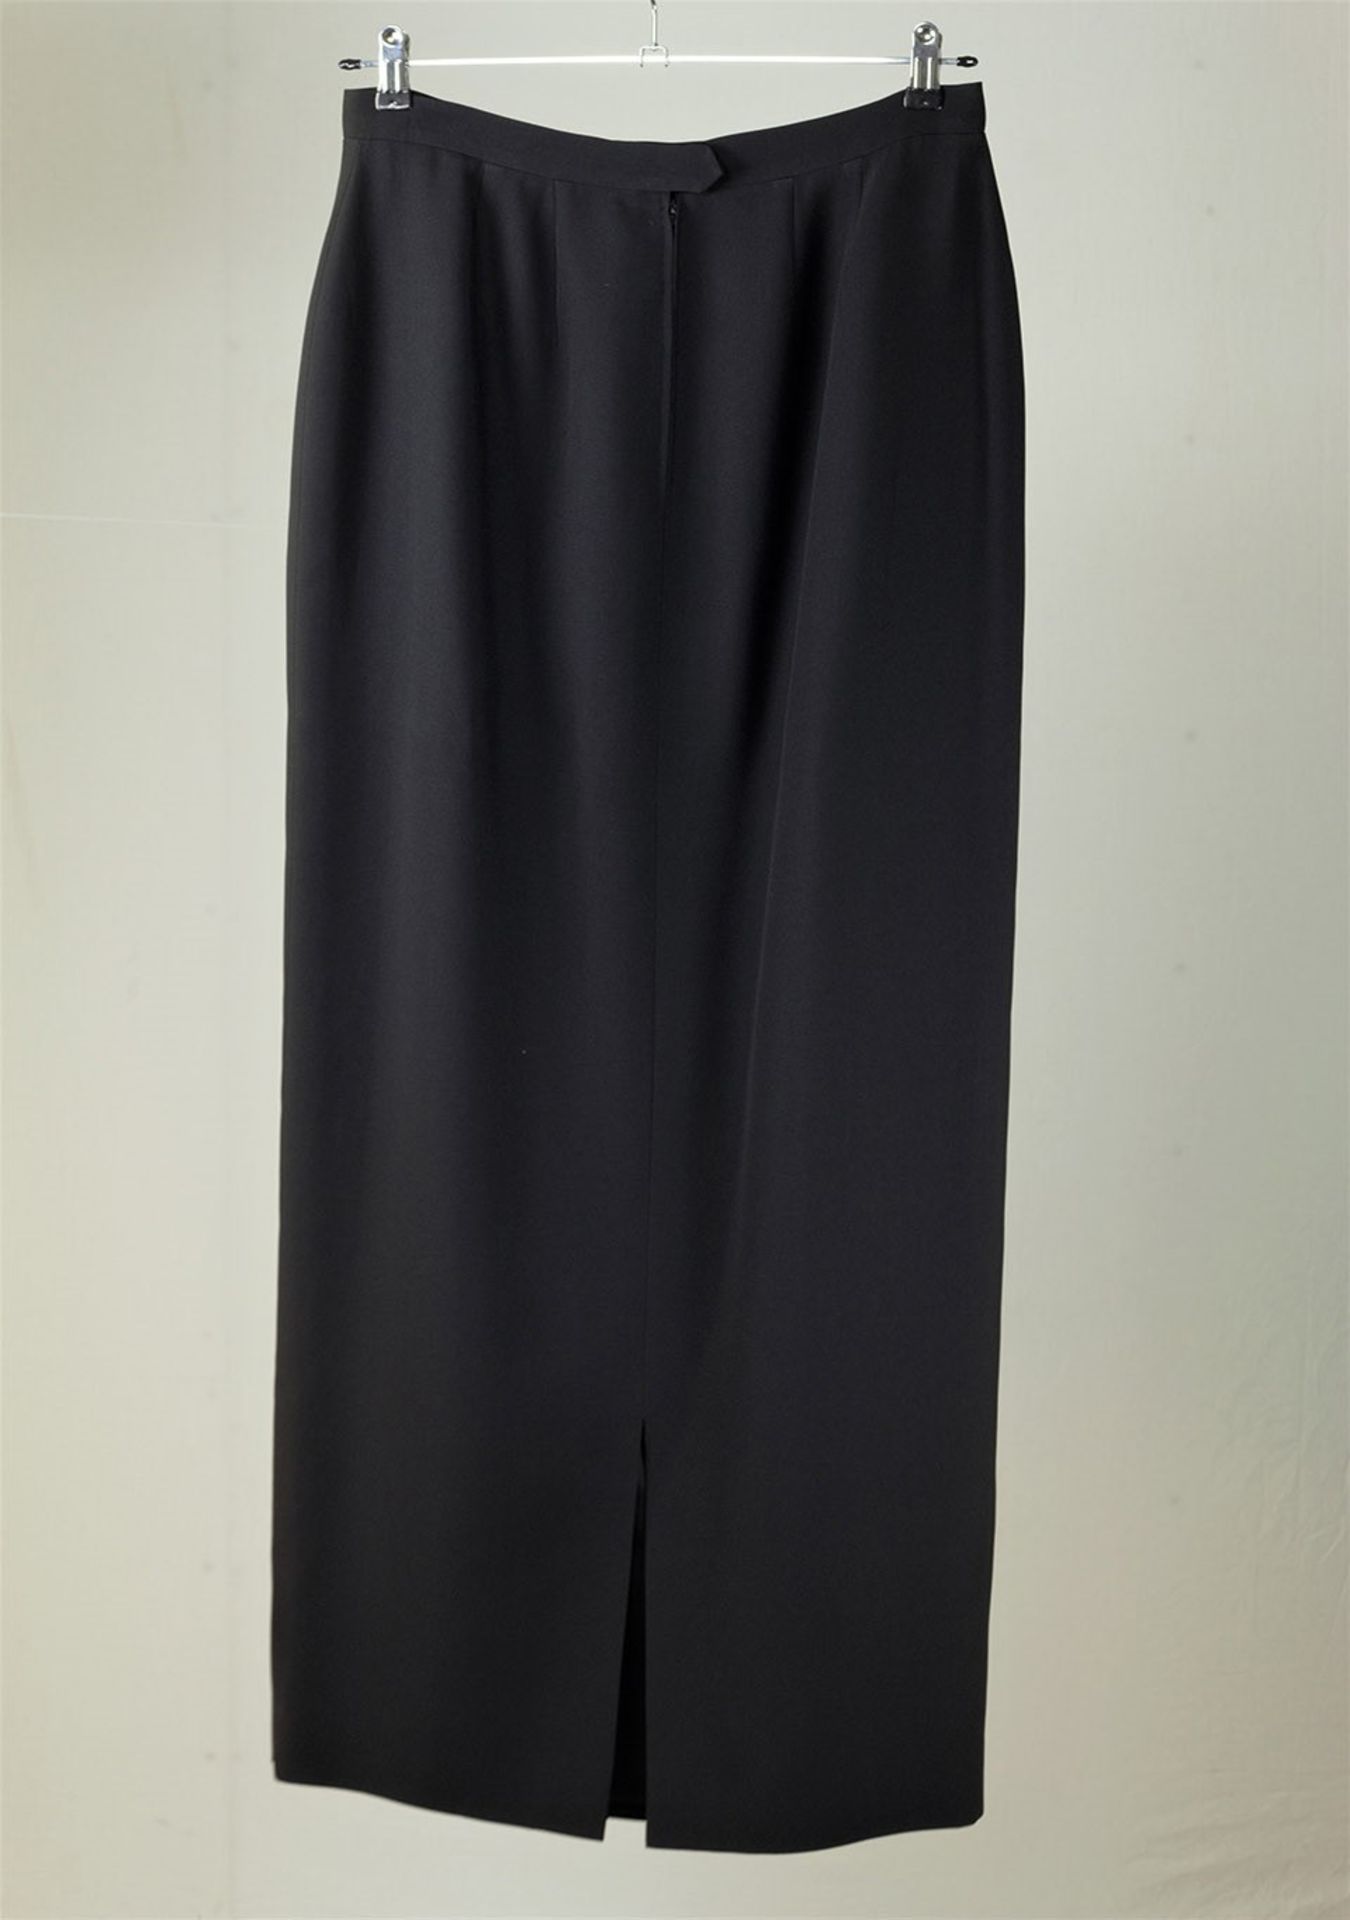 1 x Boutique Le Duc Black Maxi Pencil Skirt - From a High End Clothing Boutique In The